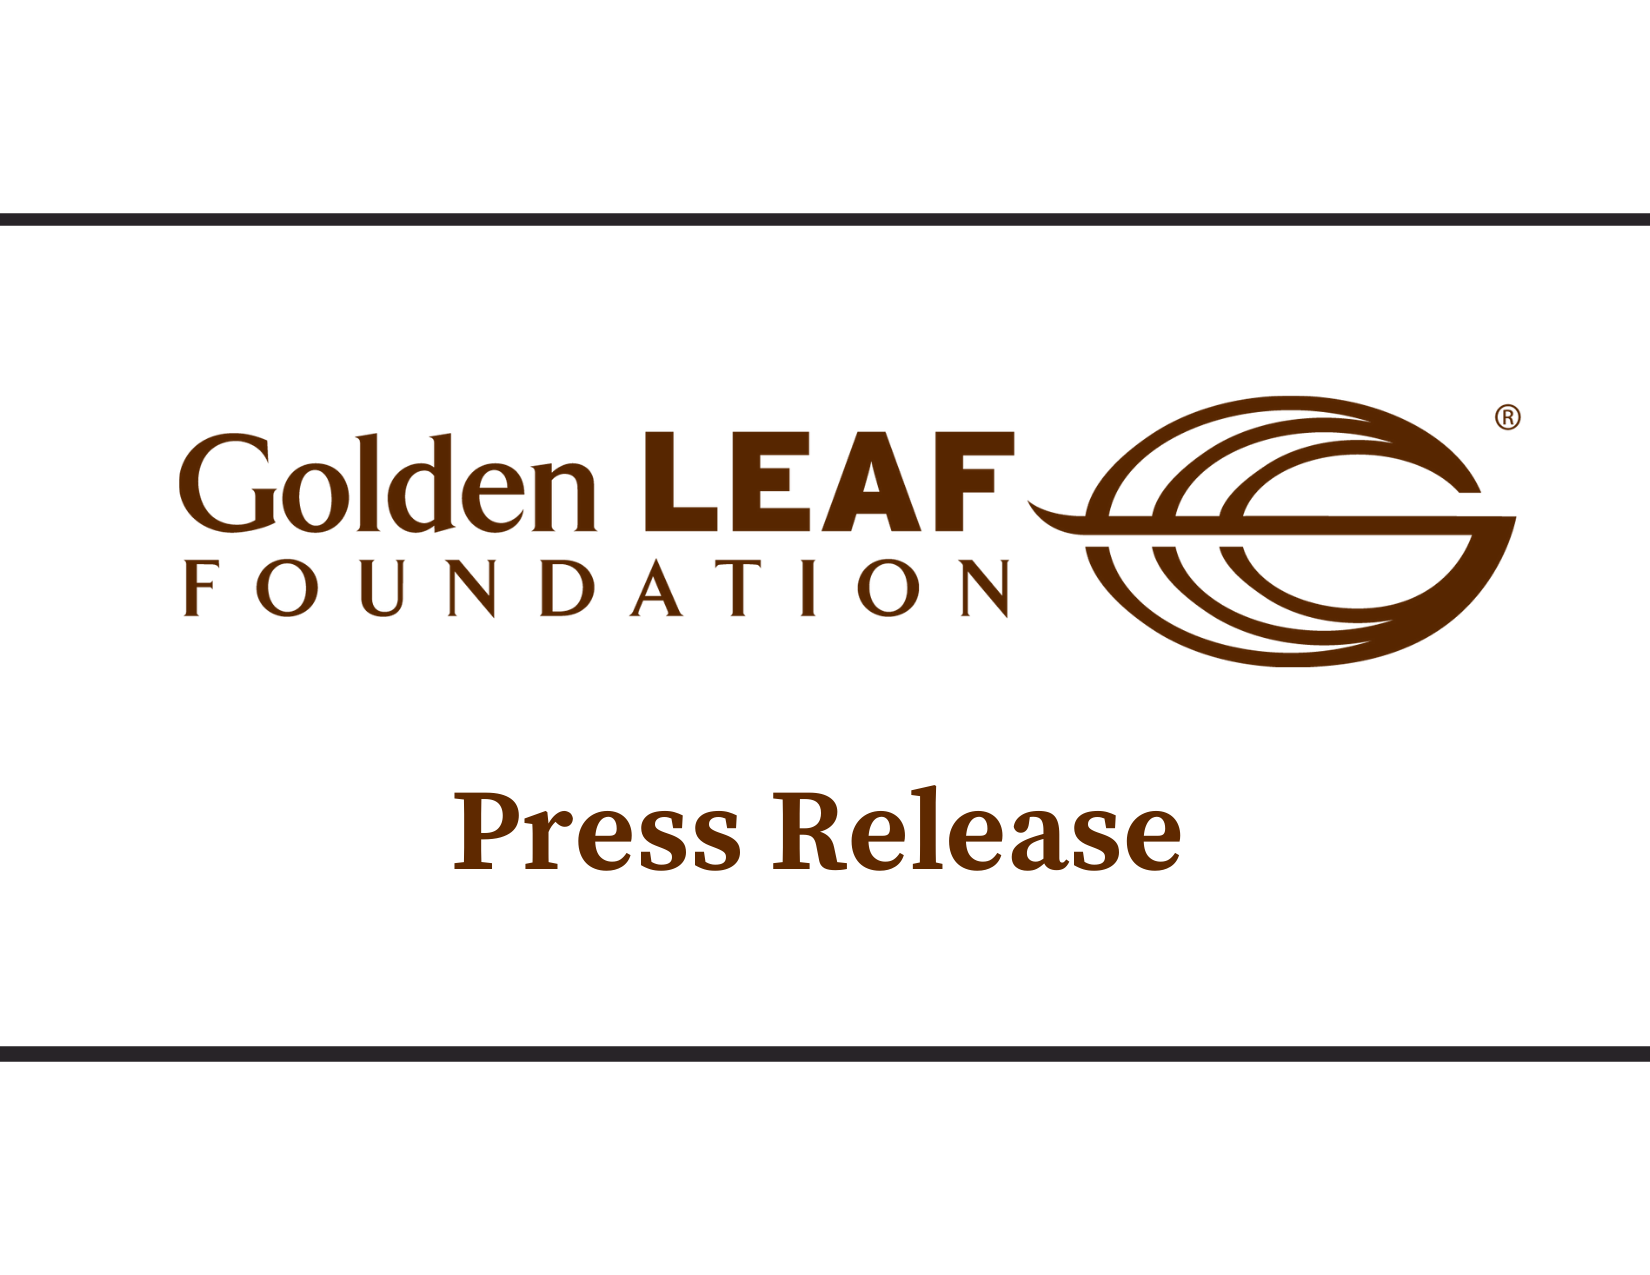 Golden LEAF Board awards $2M in funding, adopts long-term strategic plan, hears update on economy